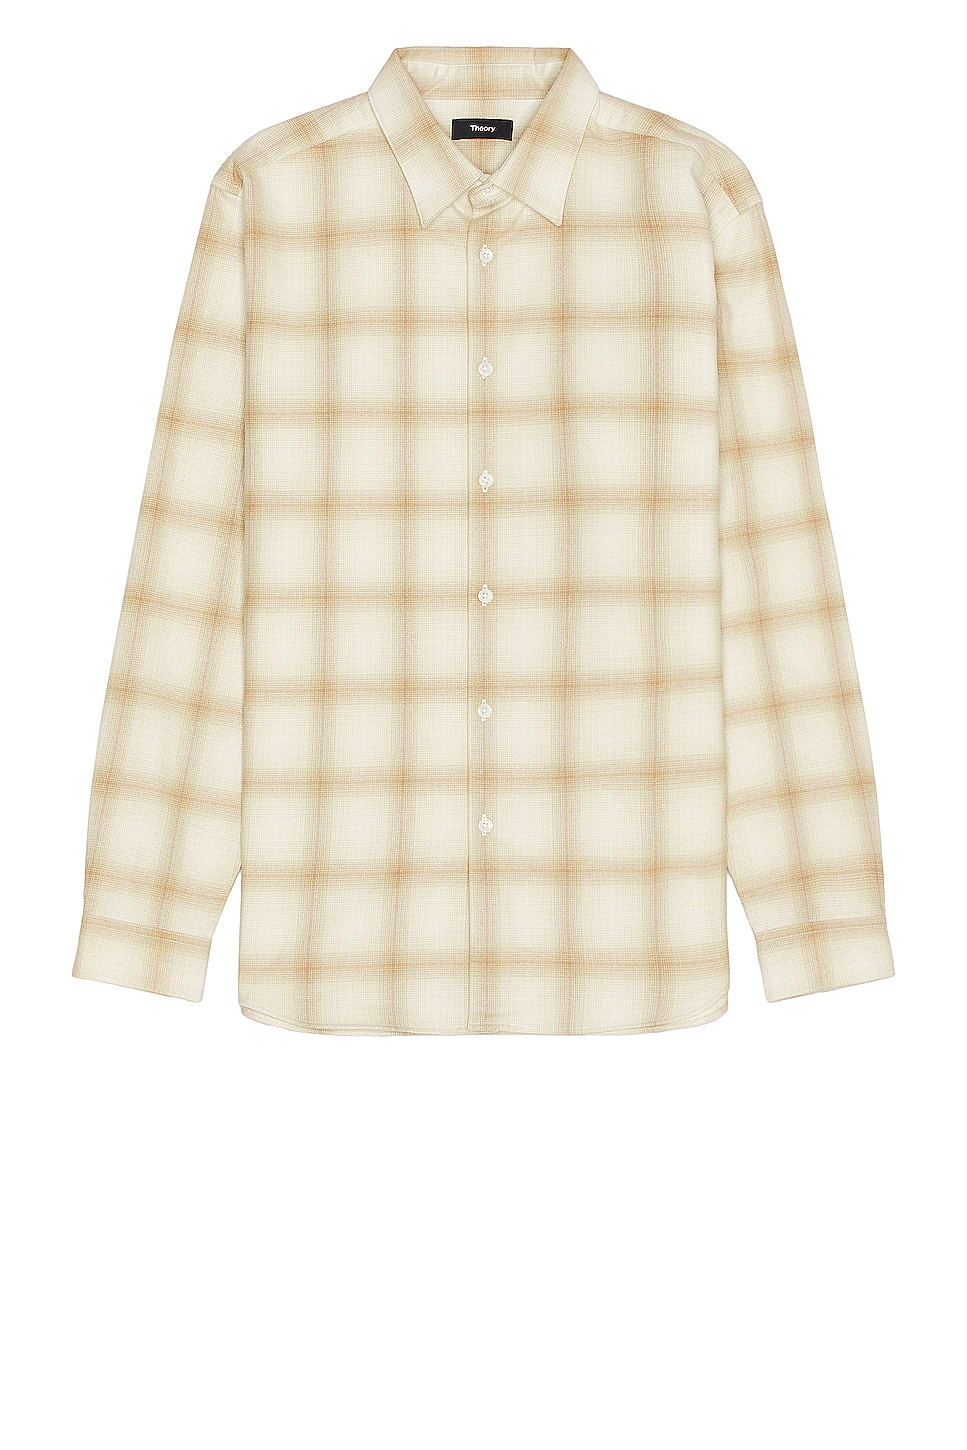 Image 1 of Theory Irving Flannel in Natural Multi